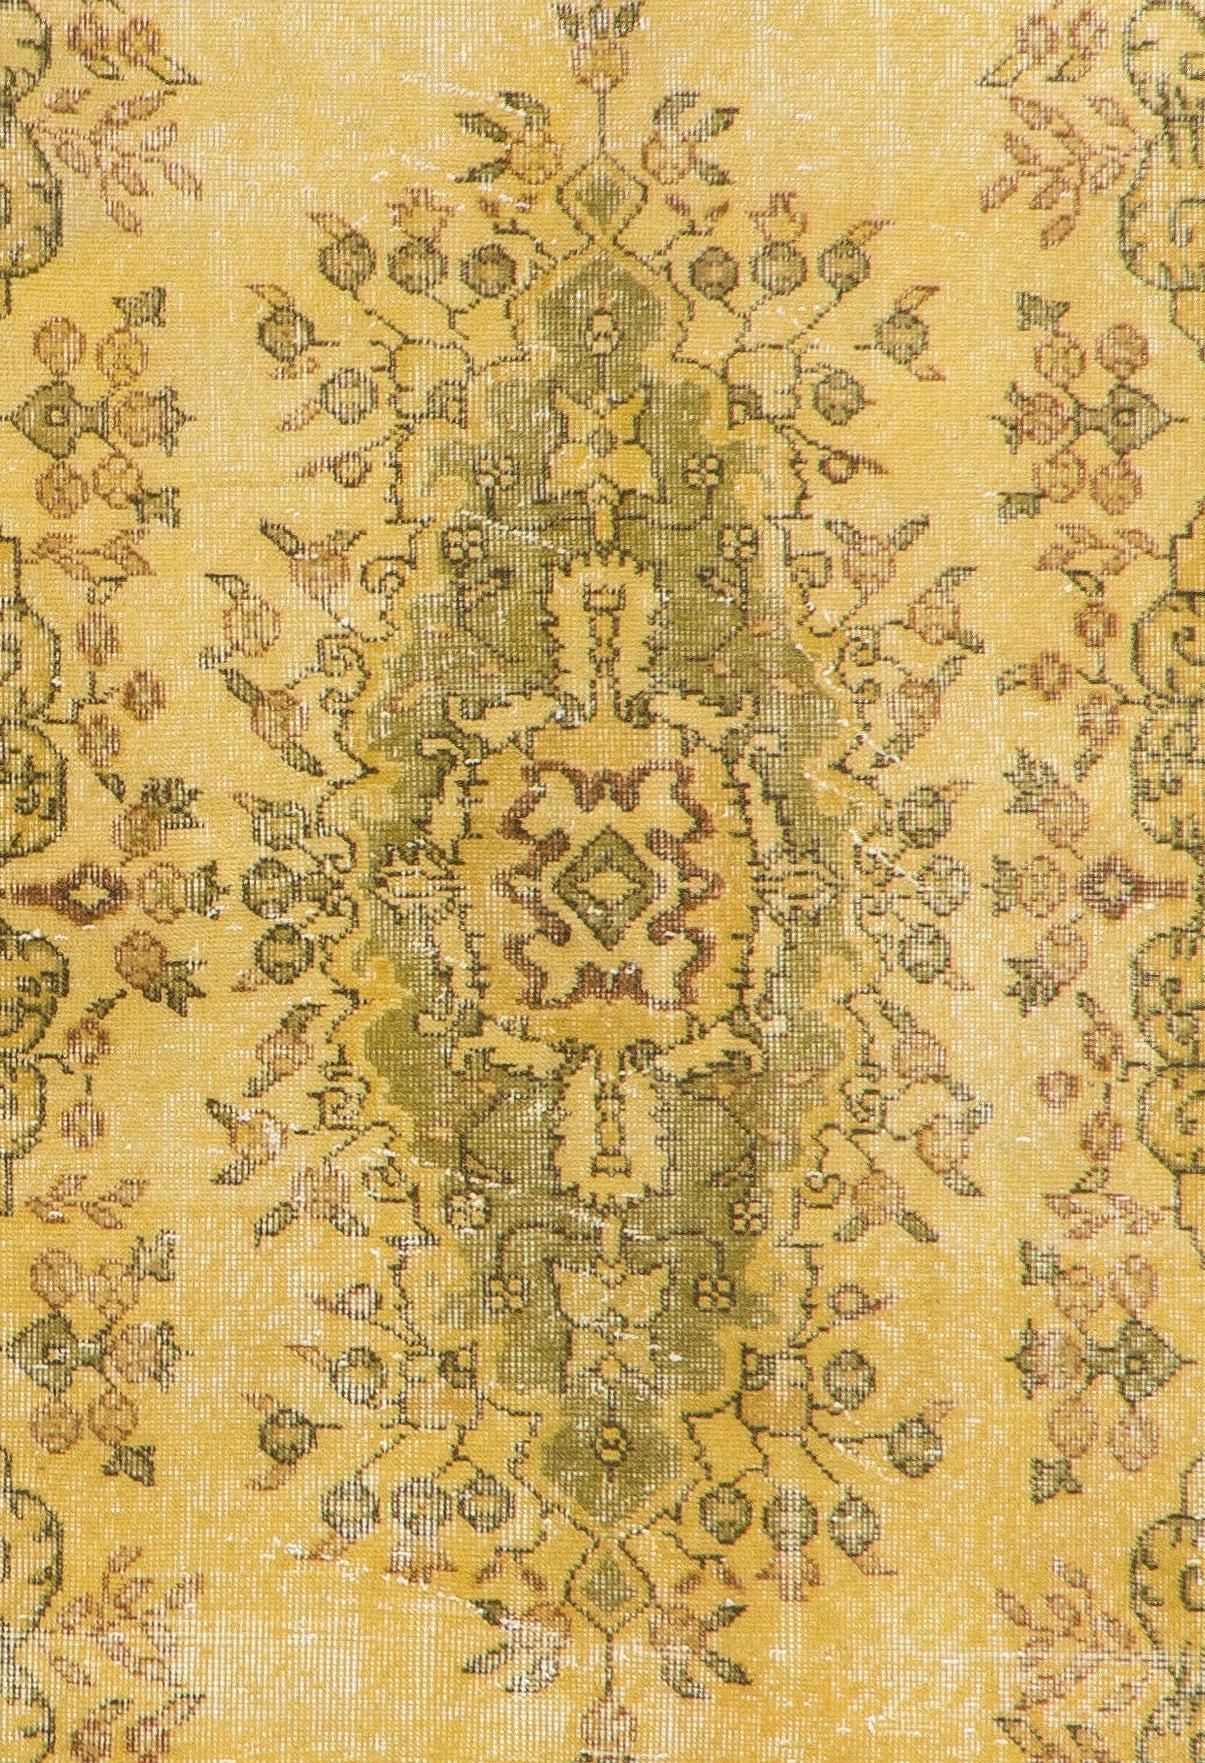 3.8x7.2 Ft Hand-knotted Wool Floral Medallion Rug. Vintage Turkish Yellow Carpet In Good Condition For Sale In Philadelphia, PA